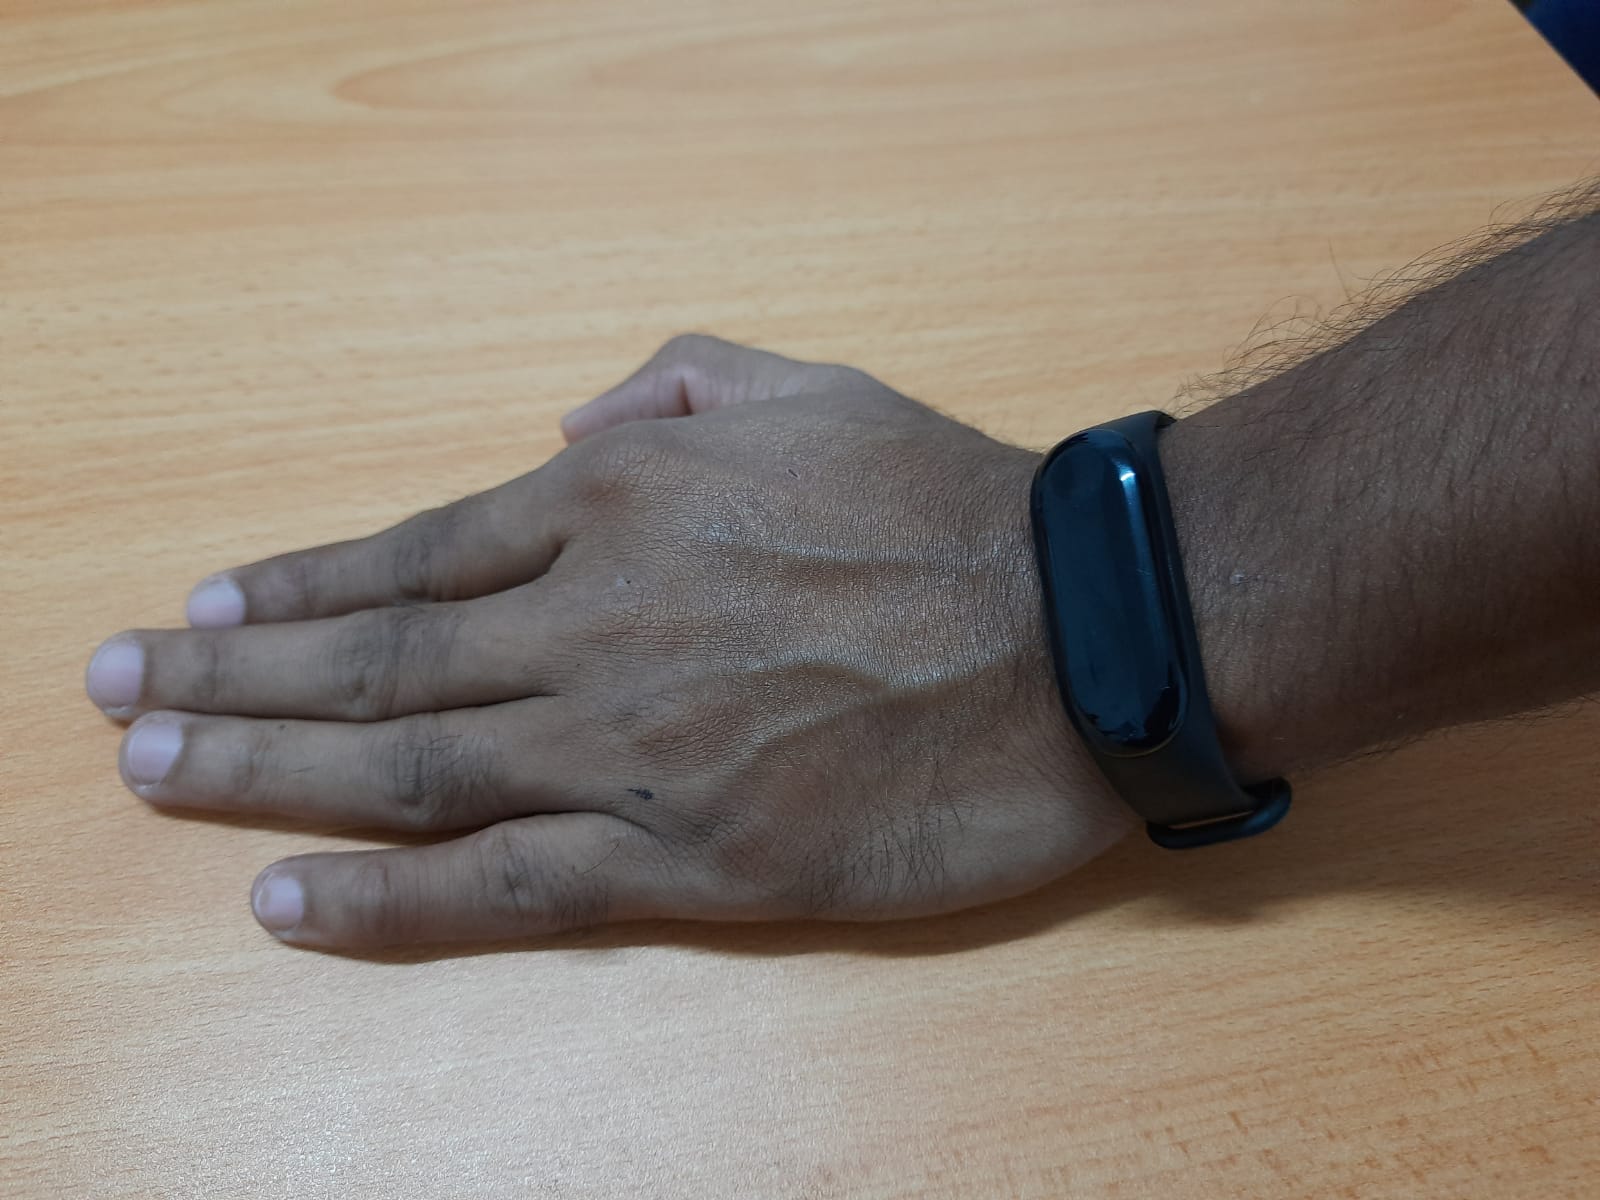 A wristband to detect hand hygiene and prevent the spread of covid.